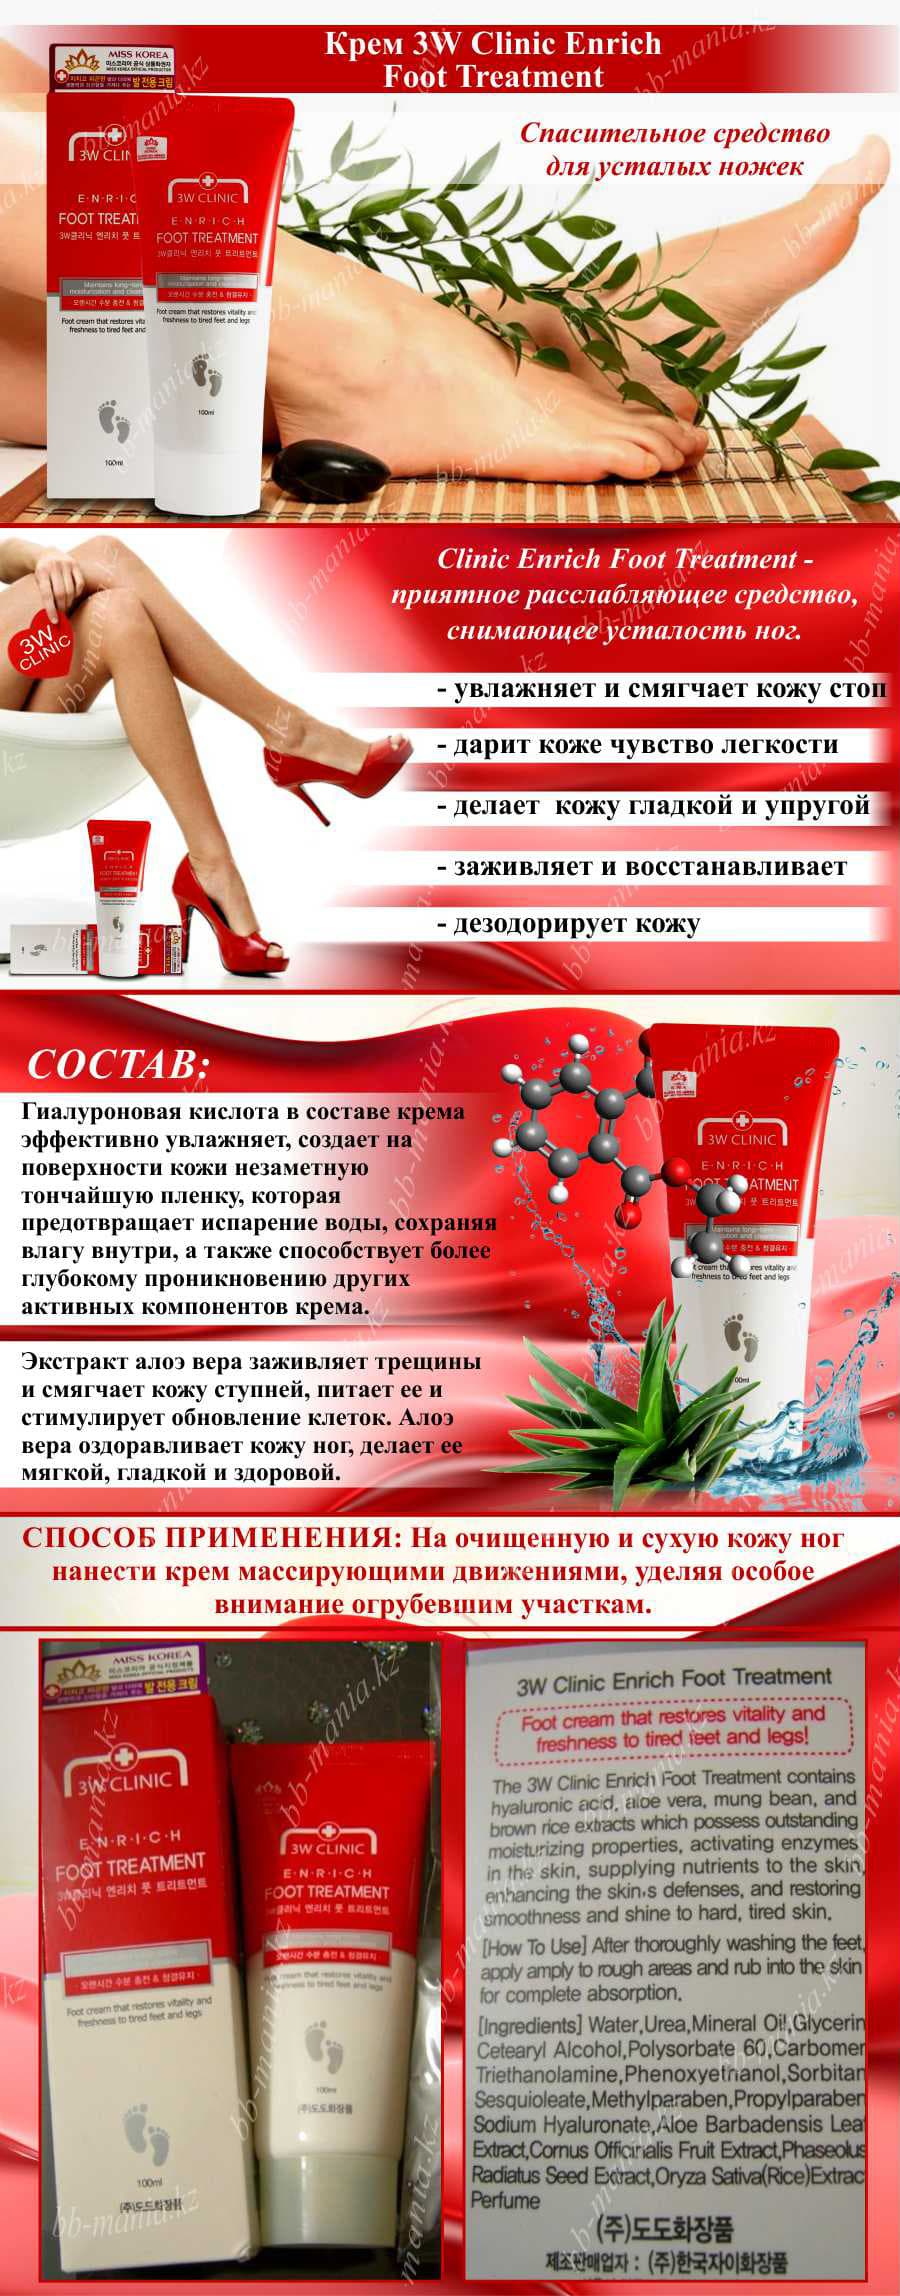 Enrich Foot Treatment [3W CLINIC] - Картинка